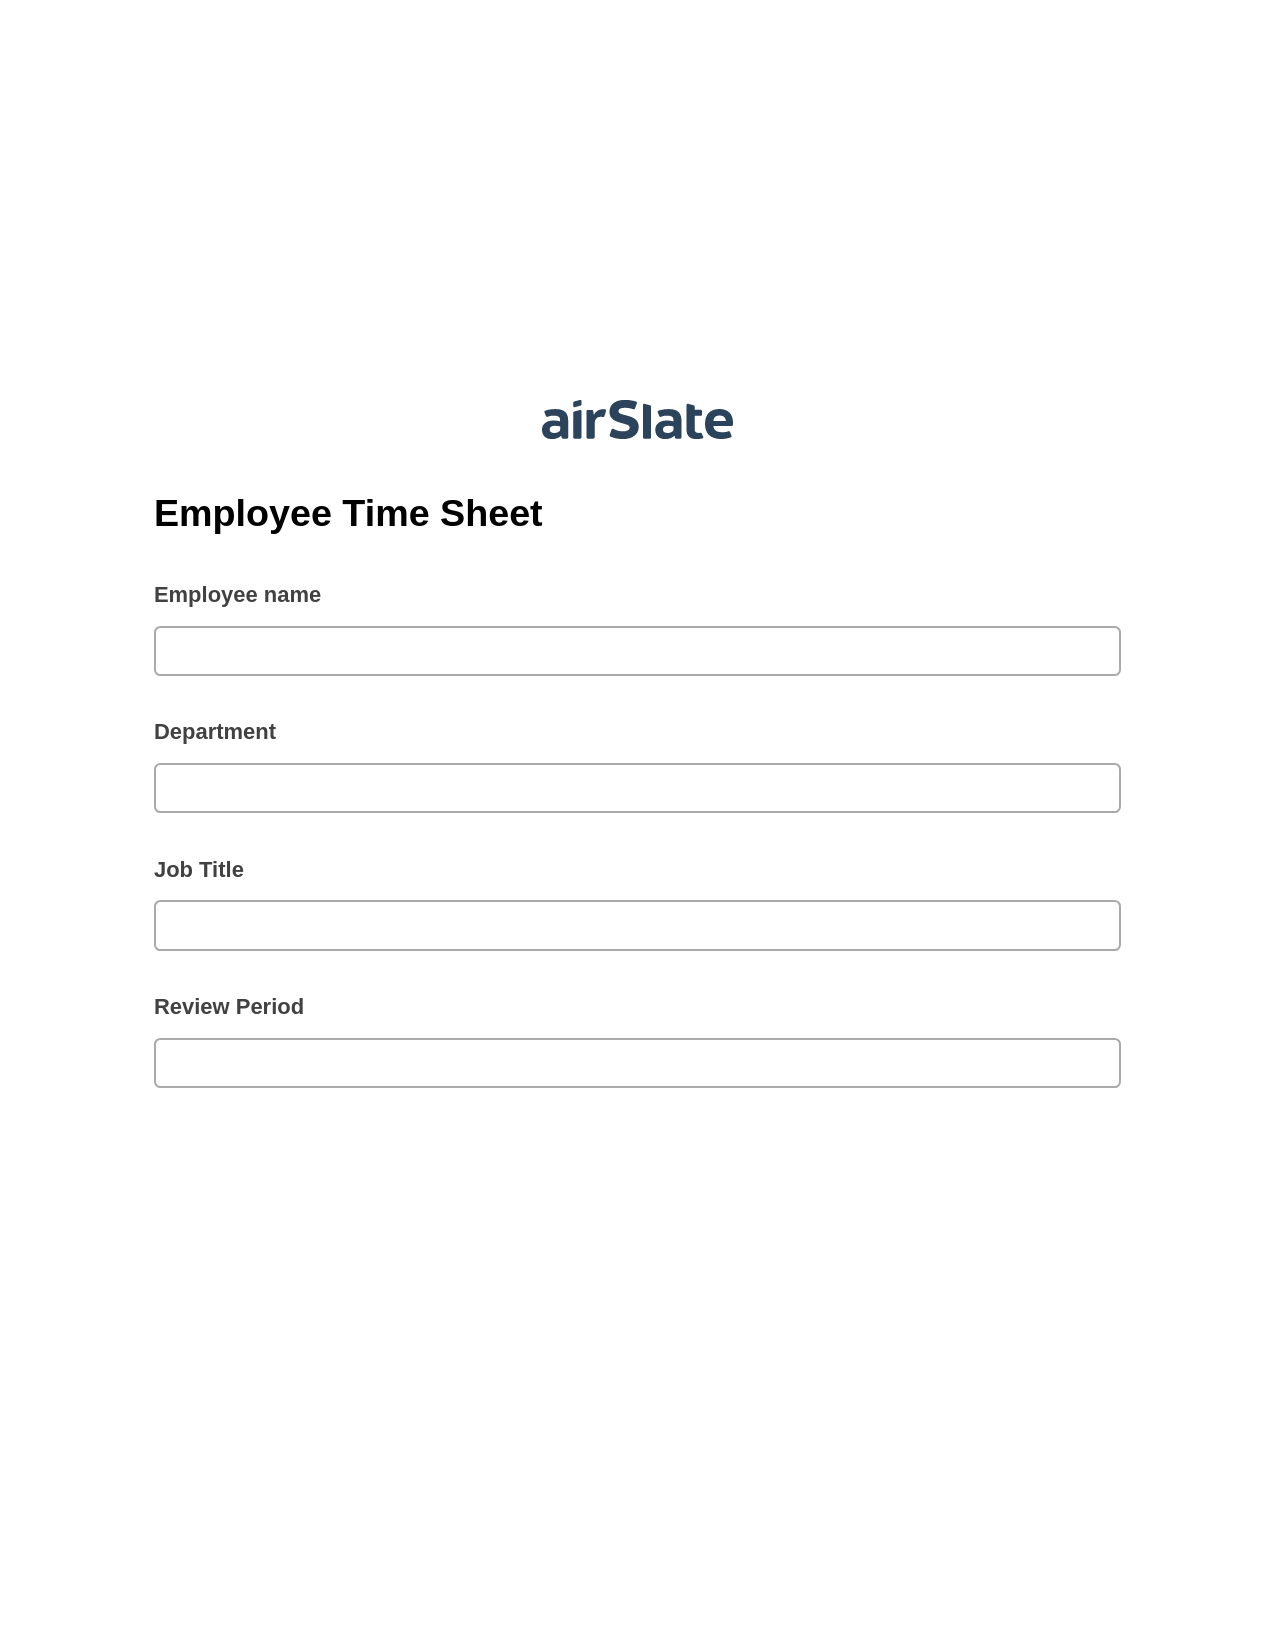 Employee Time Sheet Pre-fill from MS Dynamics 365 Records, Create Salesforce Records Bot, Export to Smartsheet